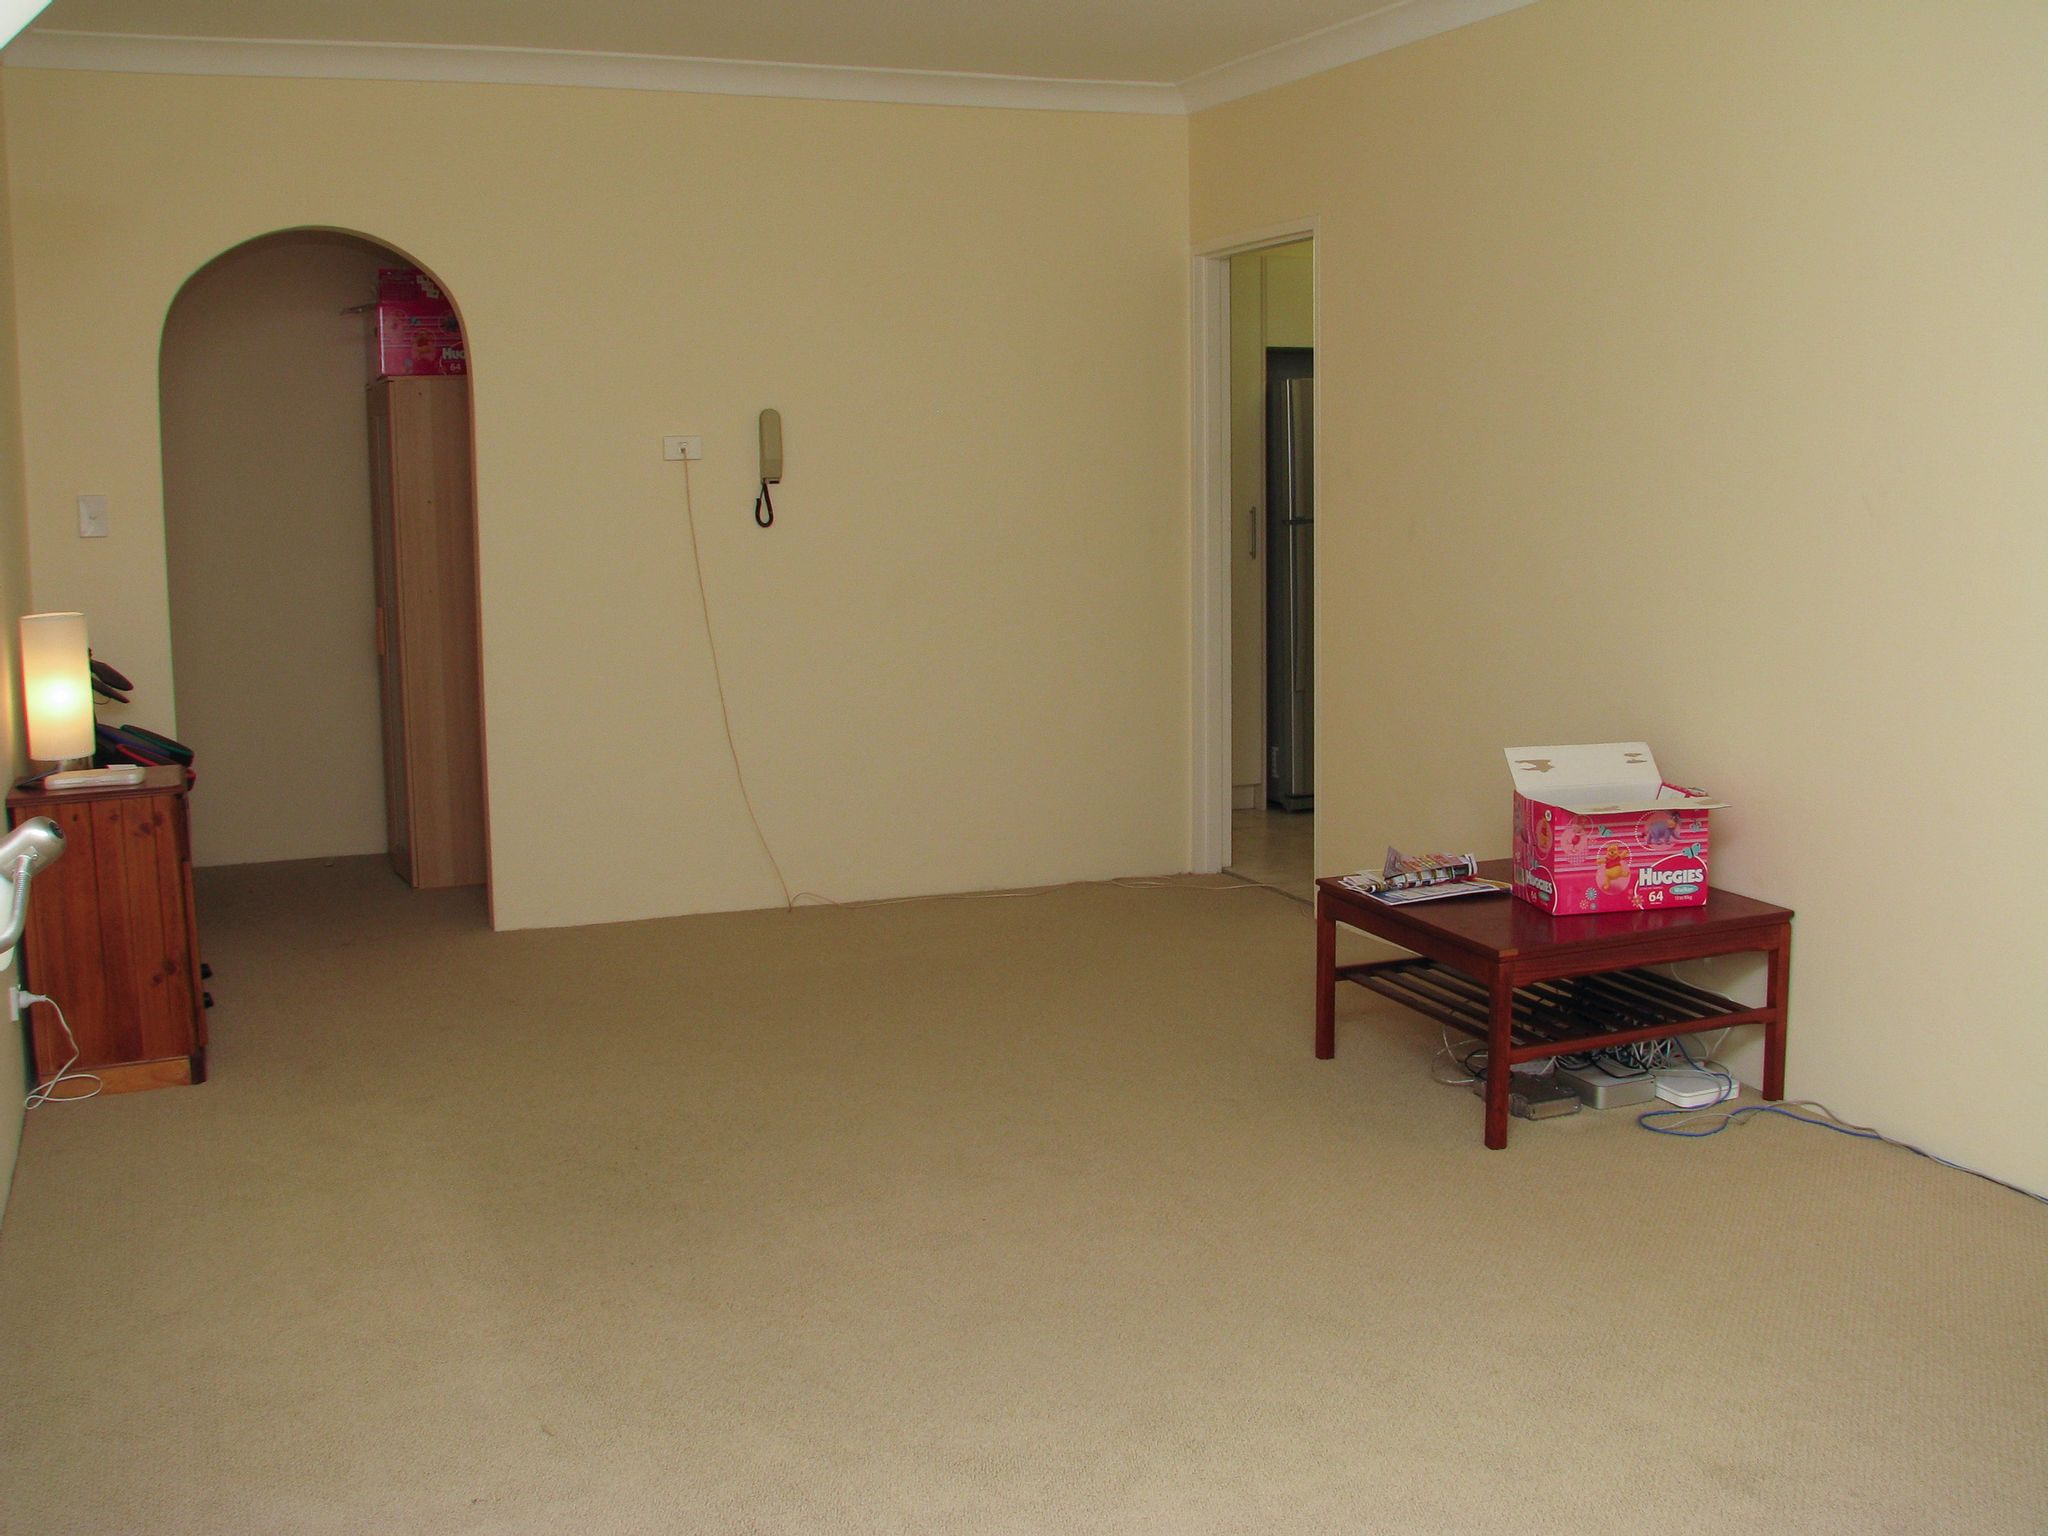 A photo of a lounge room that is totally devoid of furniture except for a coffee table against the wall with some networking gear underneath it and a box of "Huggies" nappies on top, and a bedside table.